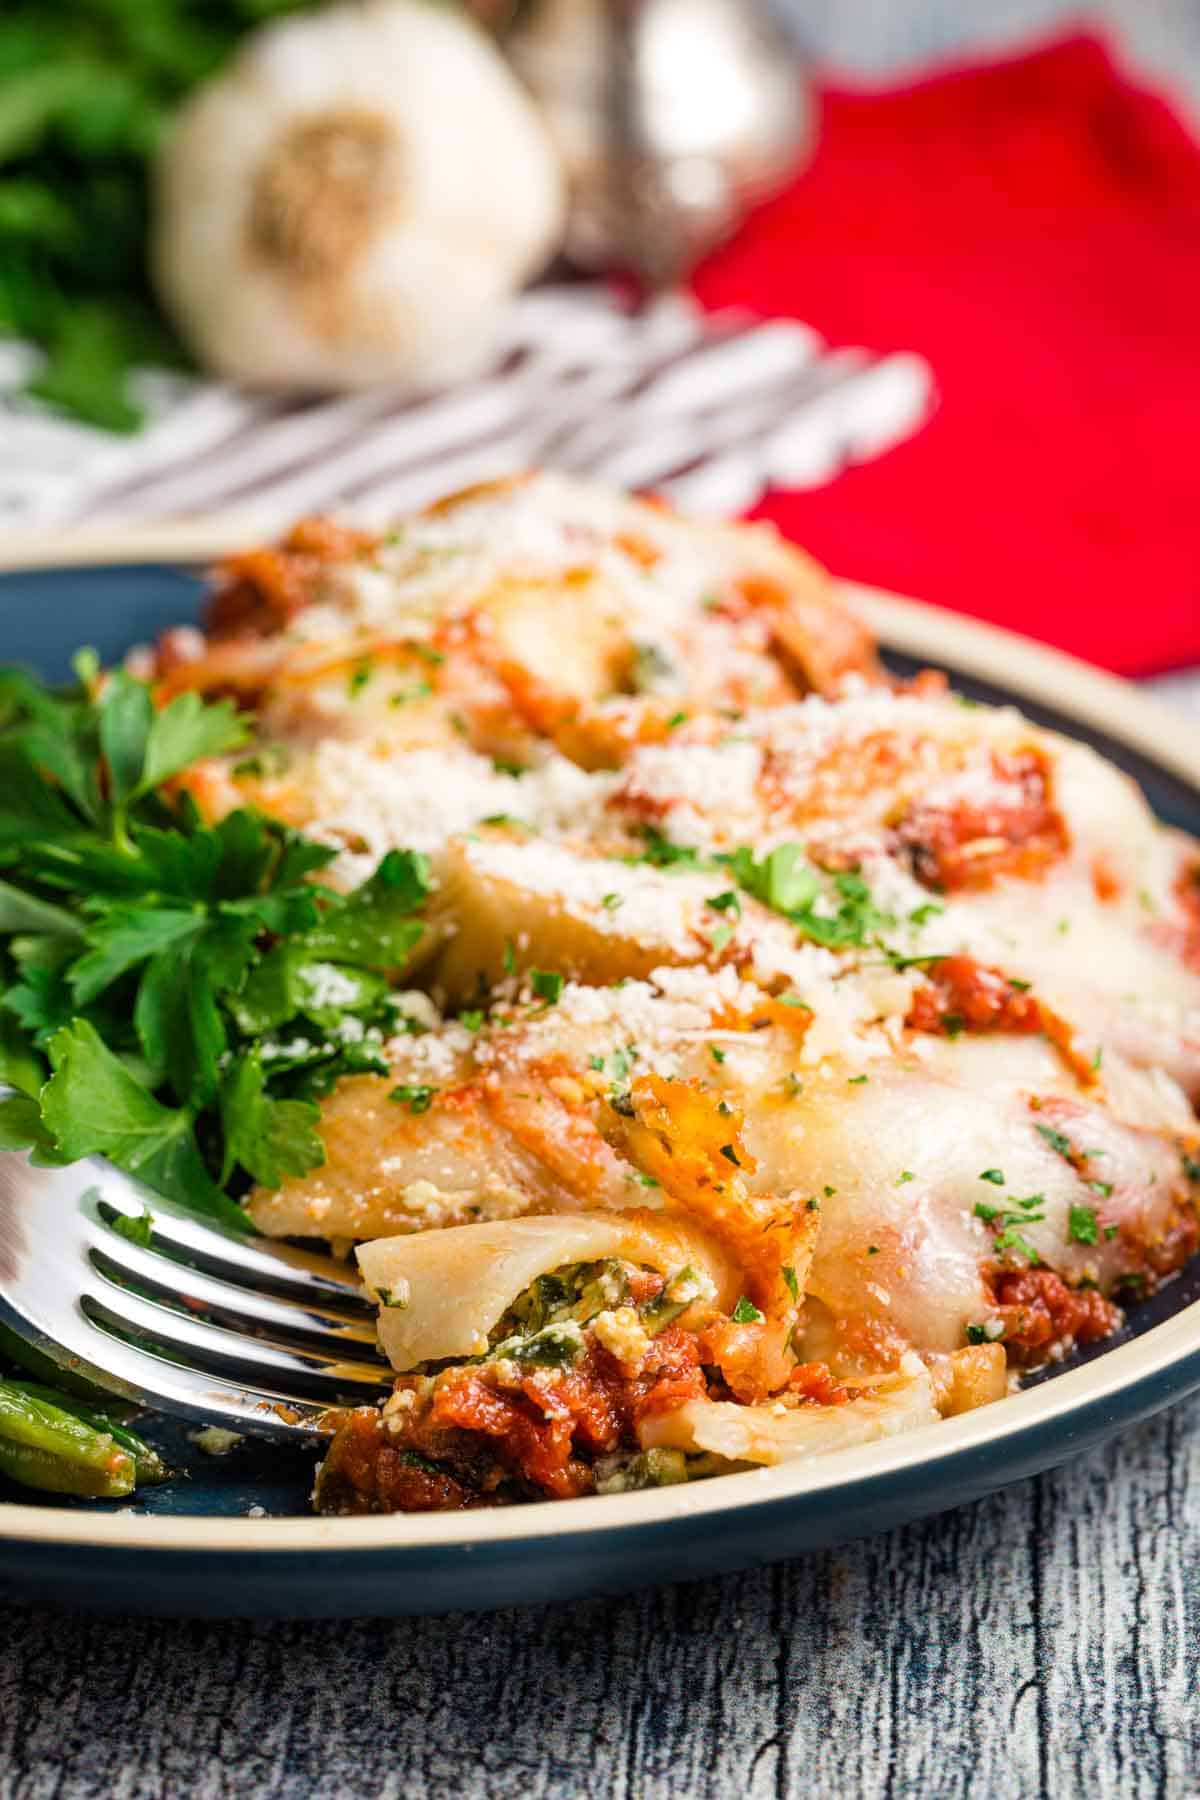 A fork digs into a plate of spinach stuffed shells.